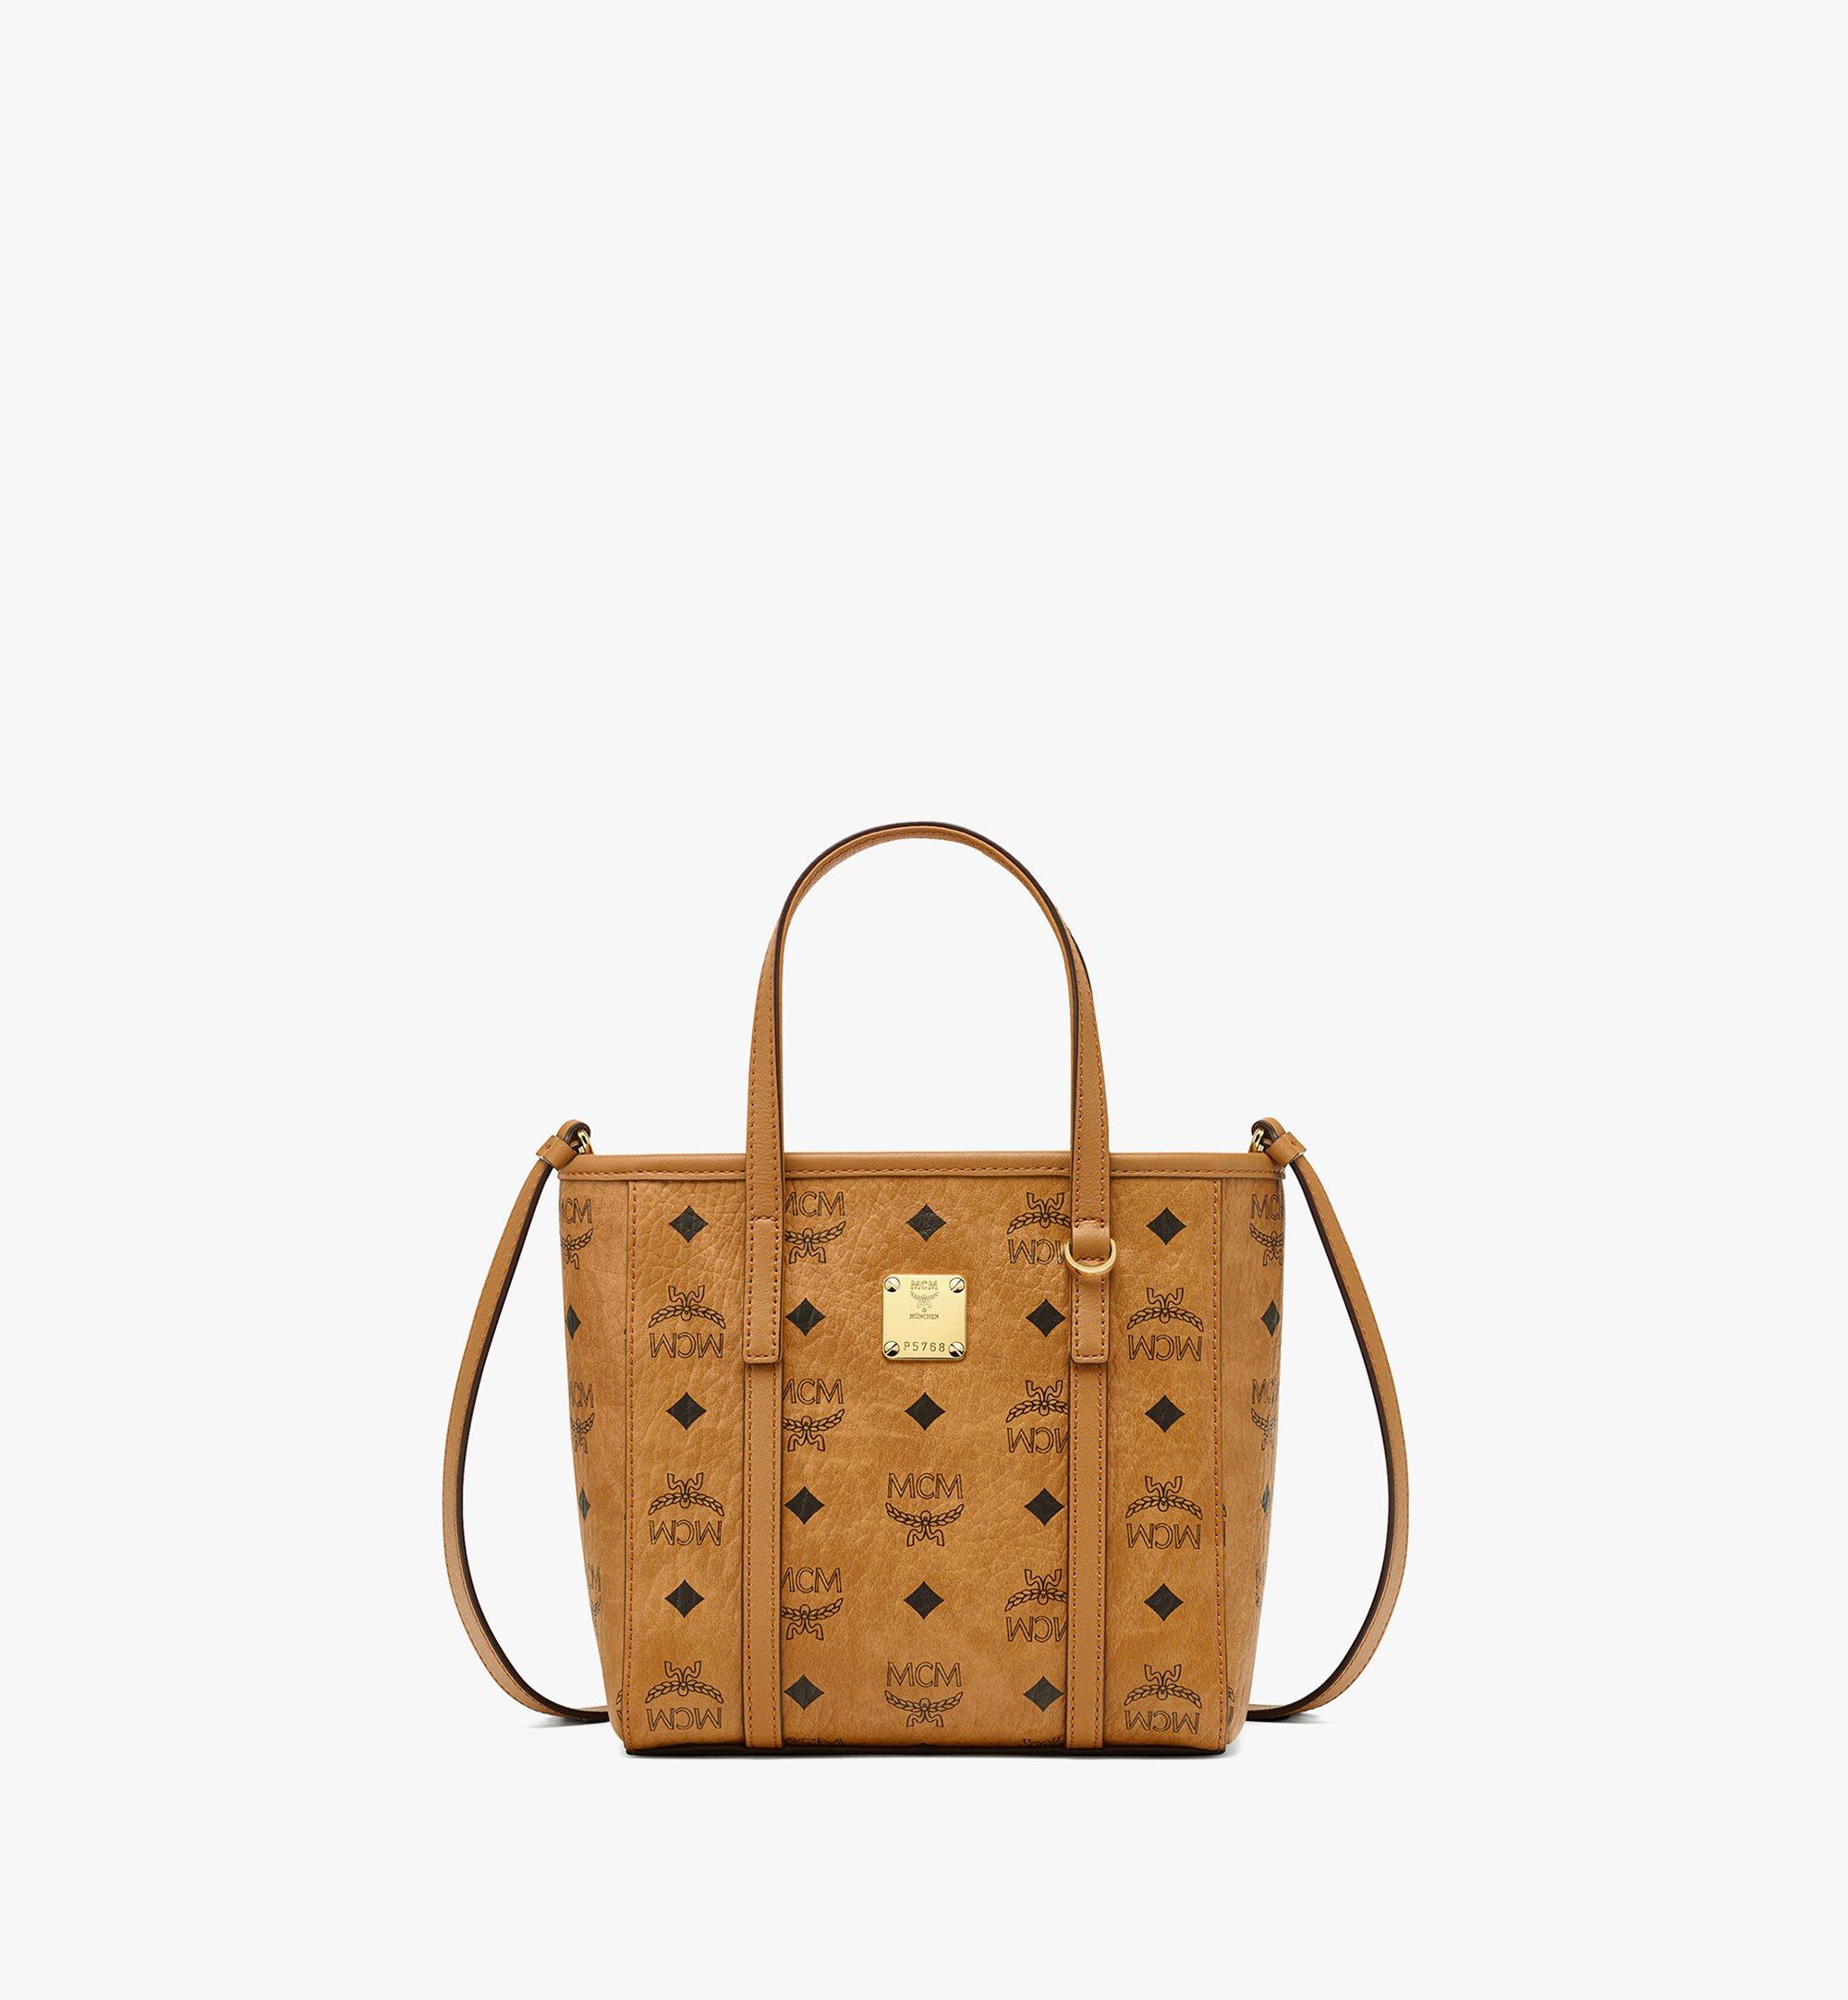 Mcm Outlet: mini bag for woman - Brown